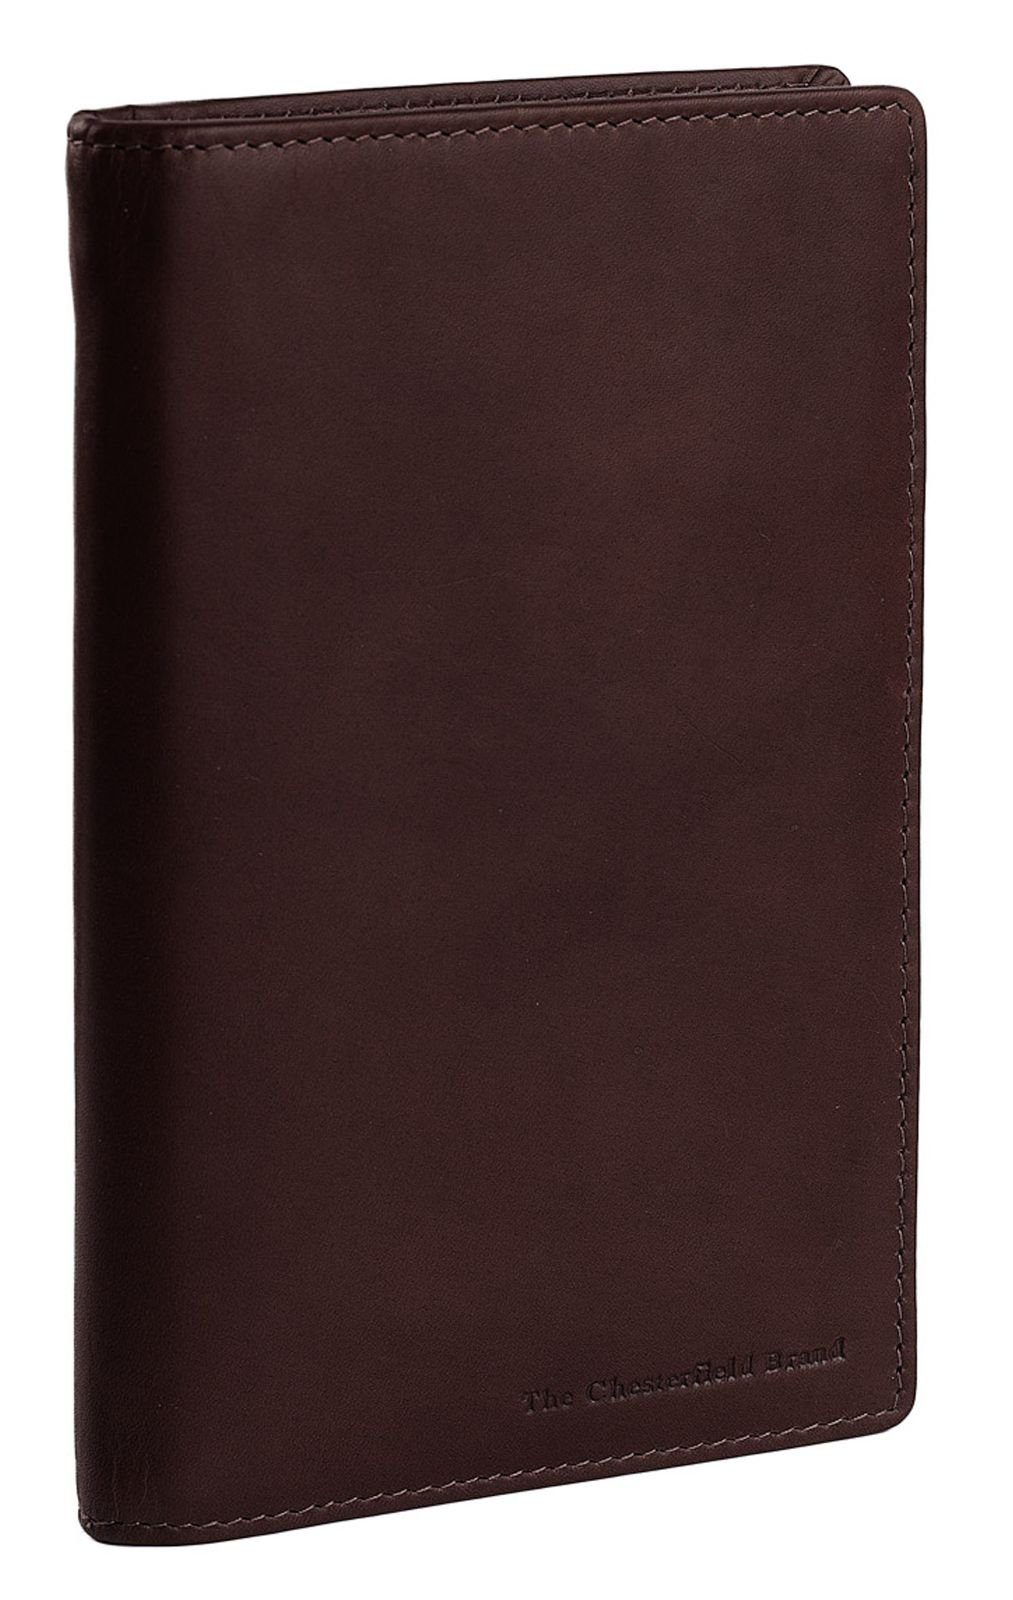 The Chesterfield Brand Etui Brown